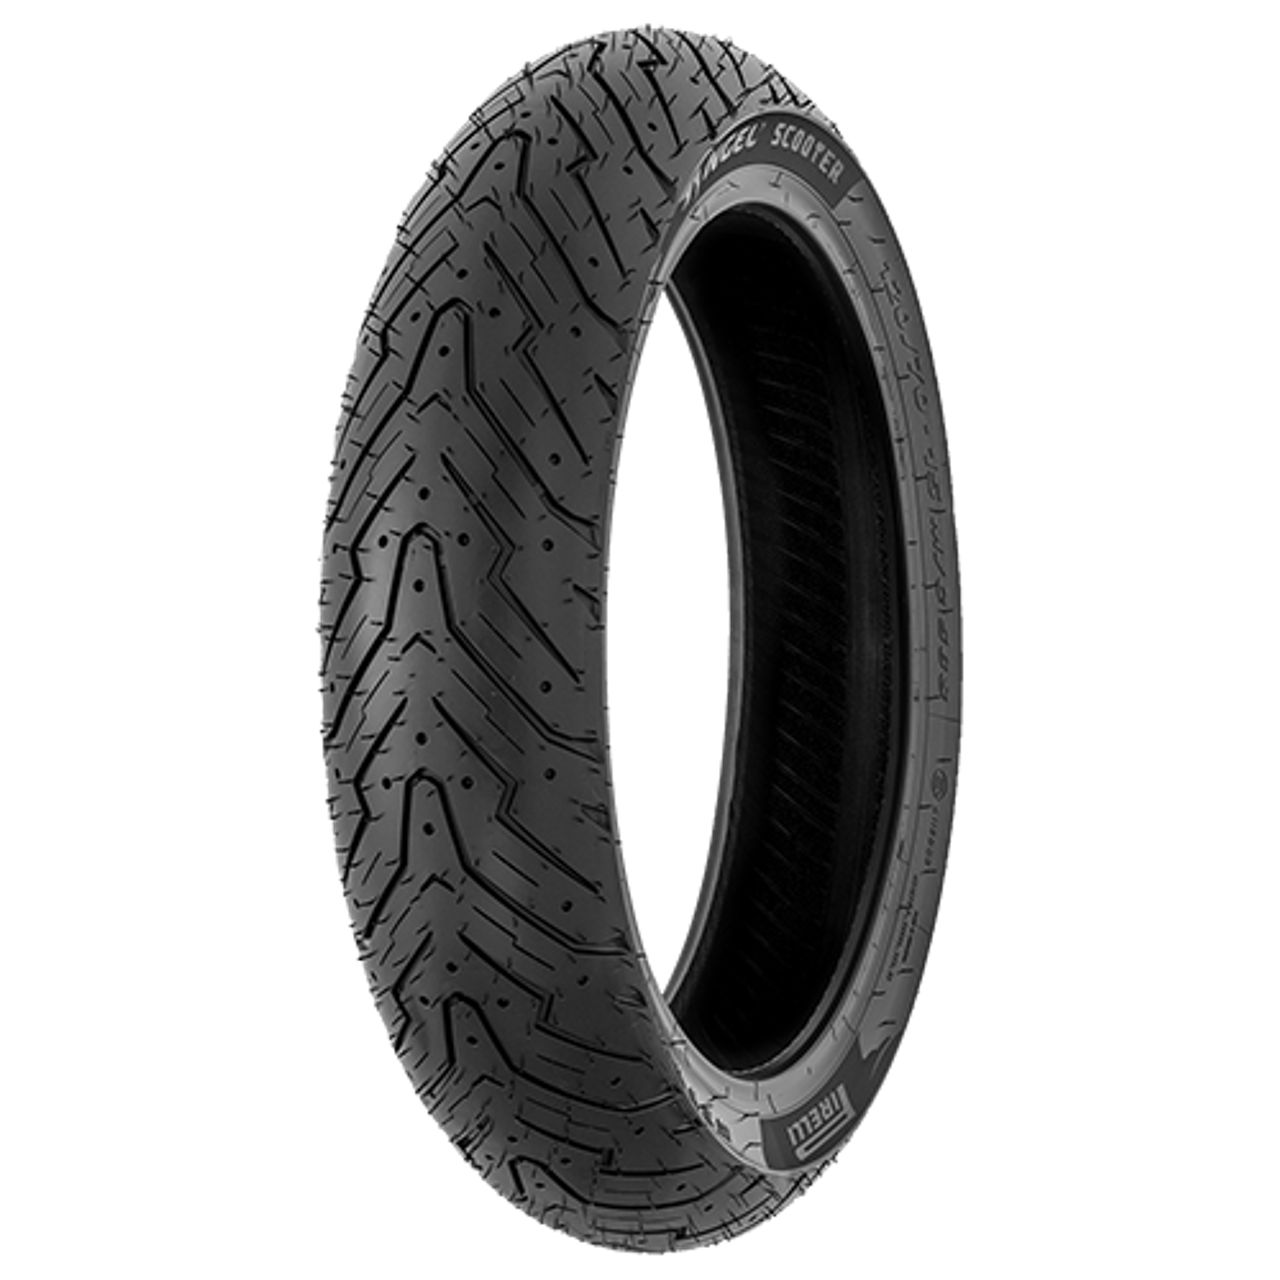 PIRELLI ANGEL SCOOTER 110/70 - 12 TL 47P FRONT/REAR